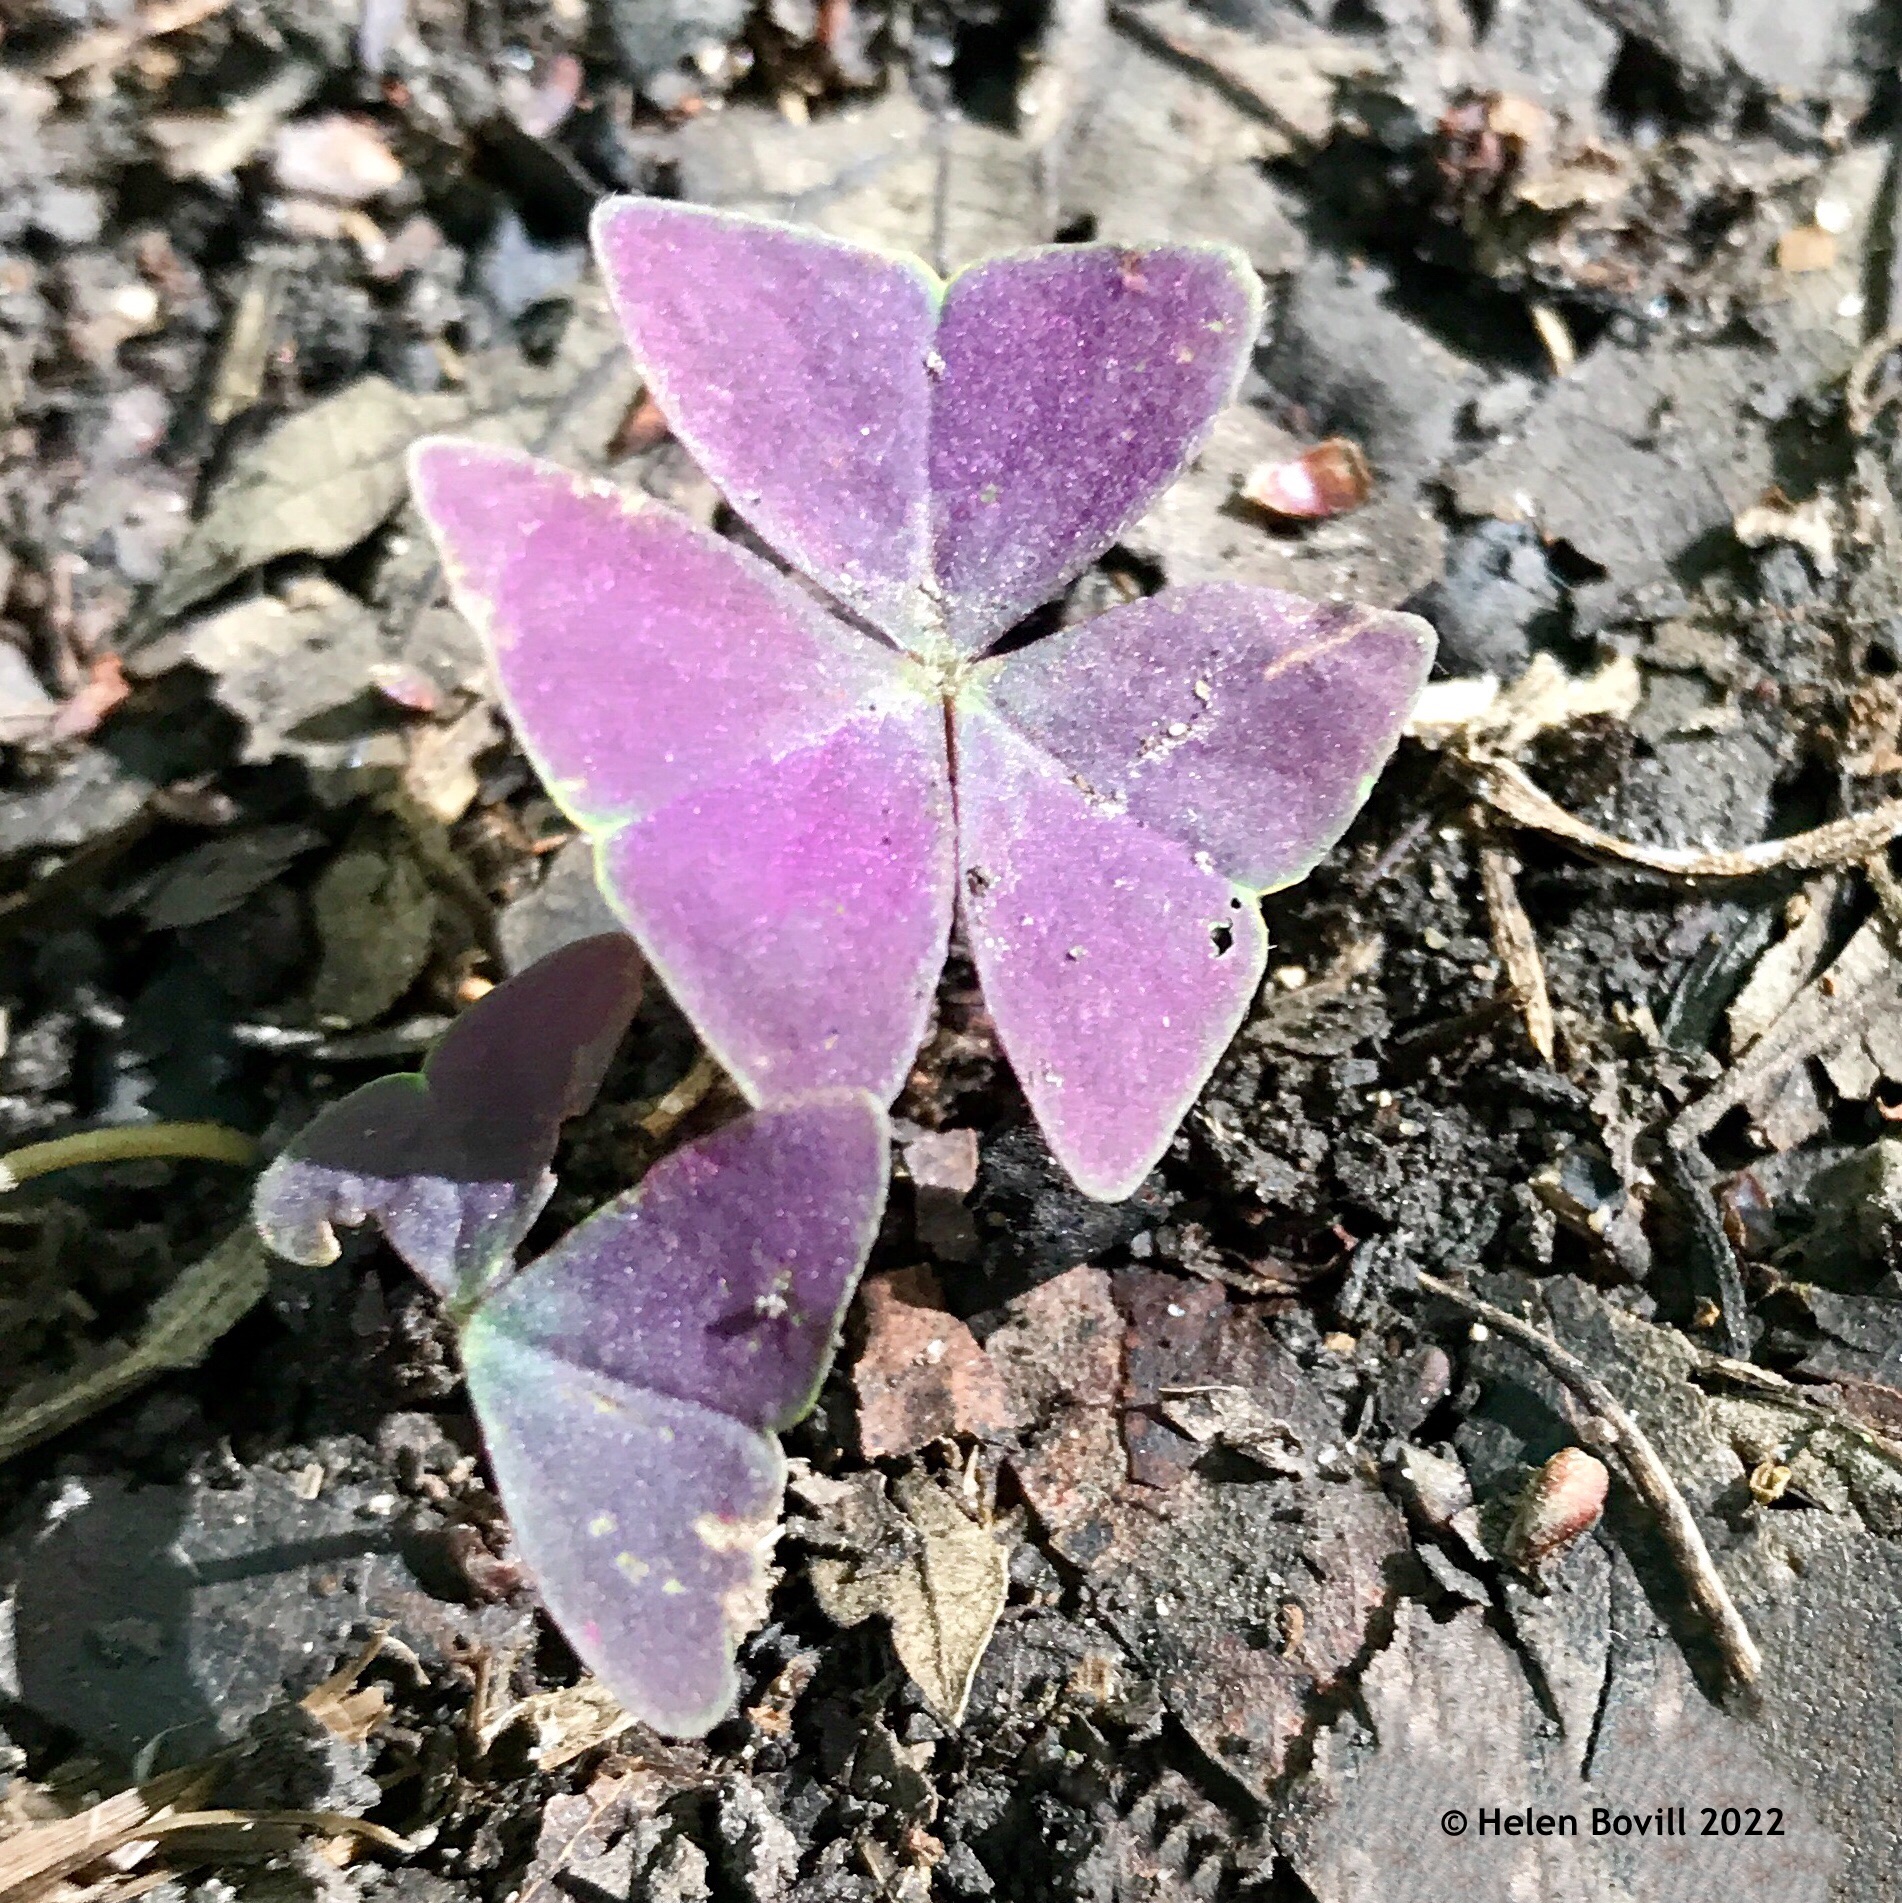 Oxalis leaves in the cemetery